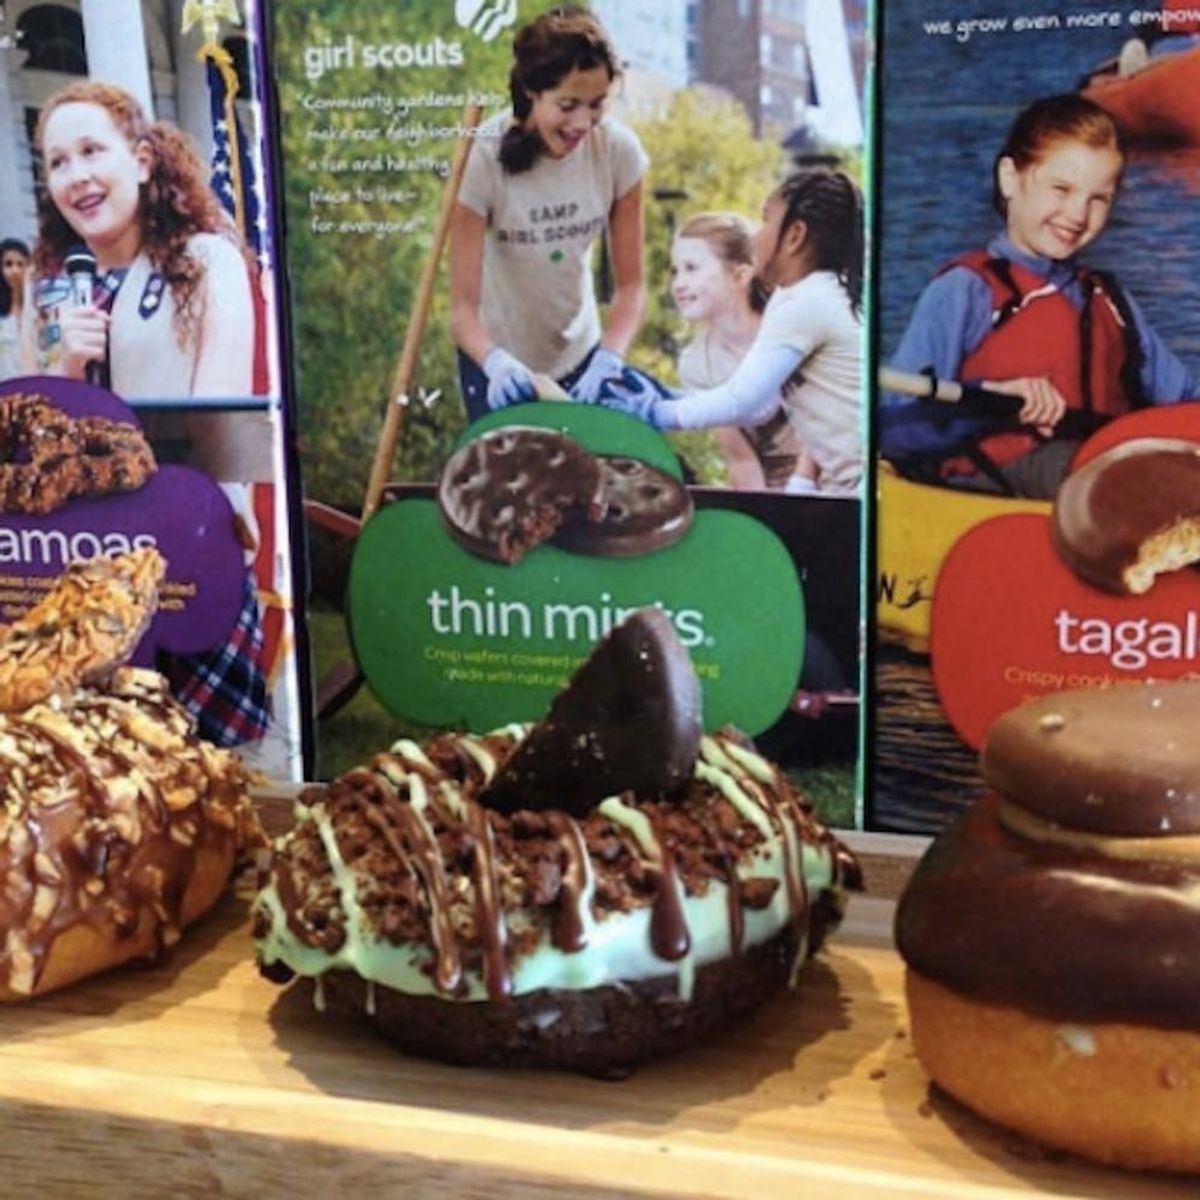 Girl Scout Donuts Exist and We Can’t Stop Drooling at the Thought